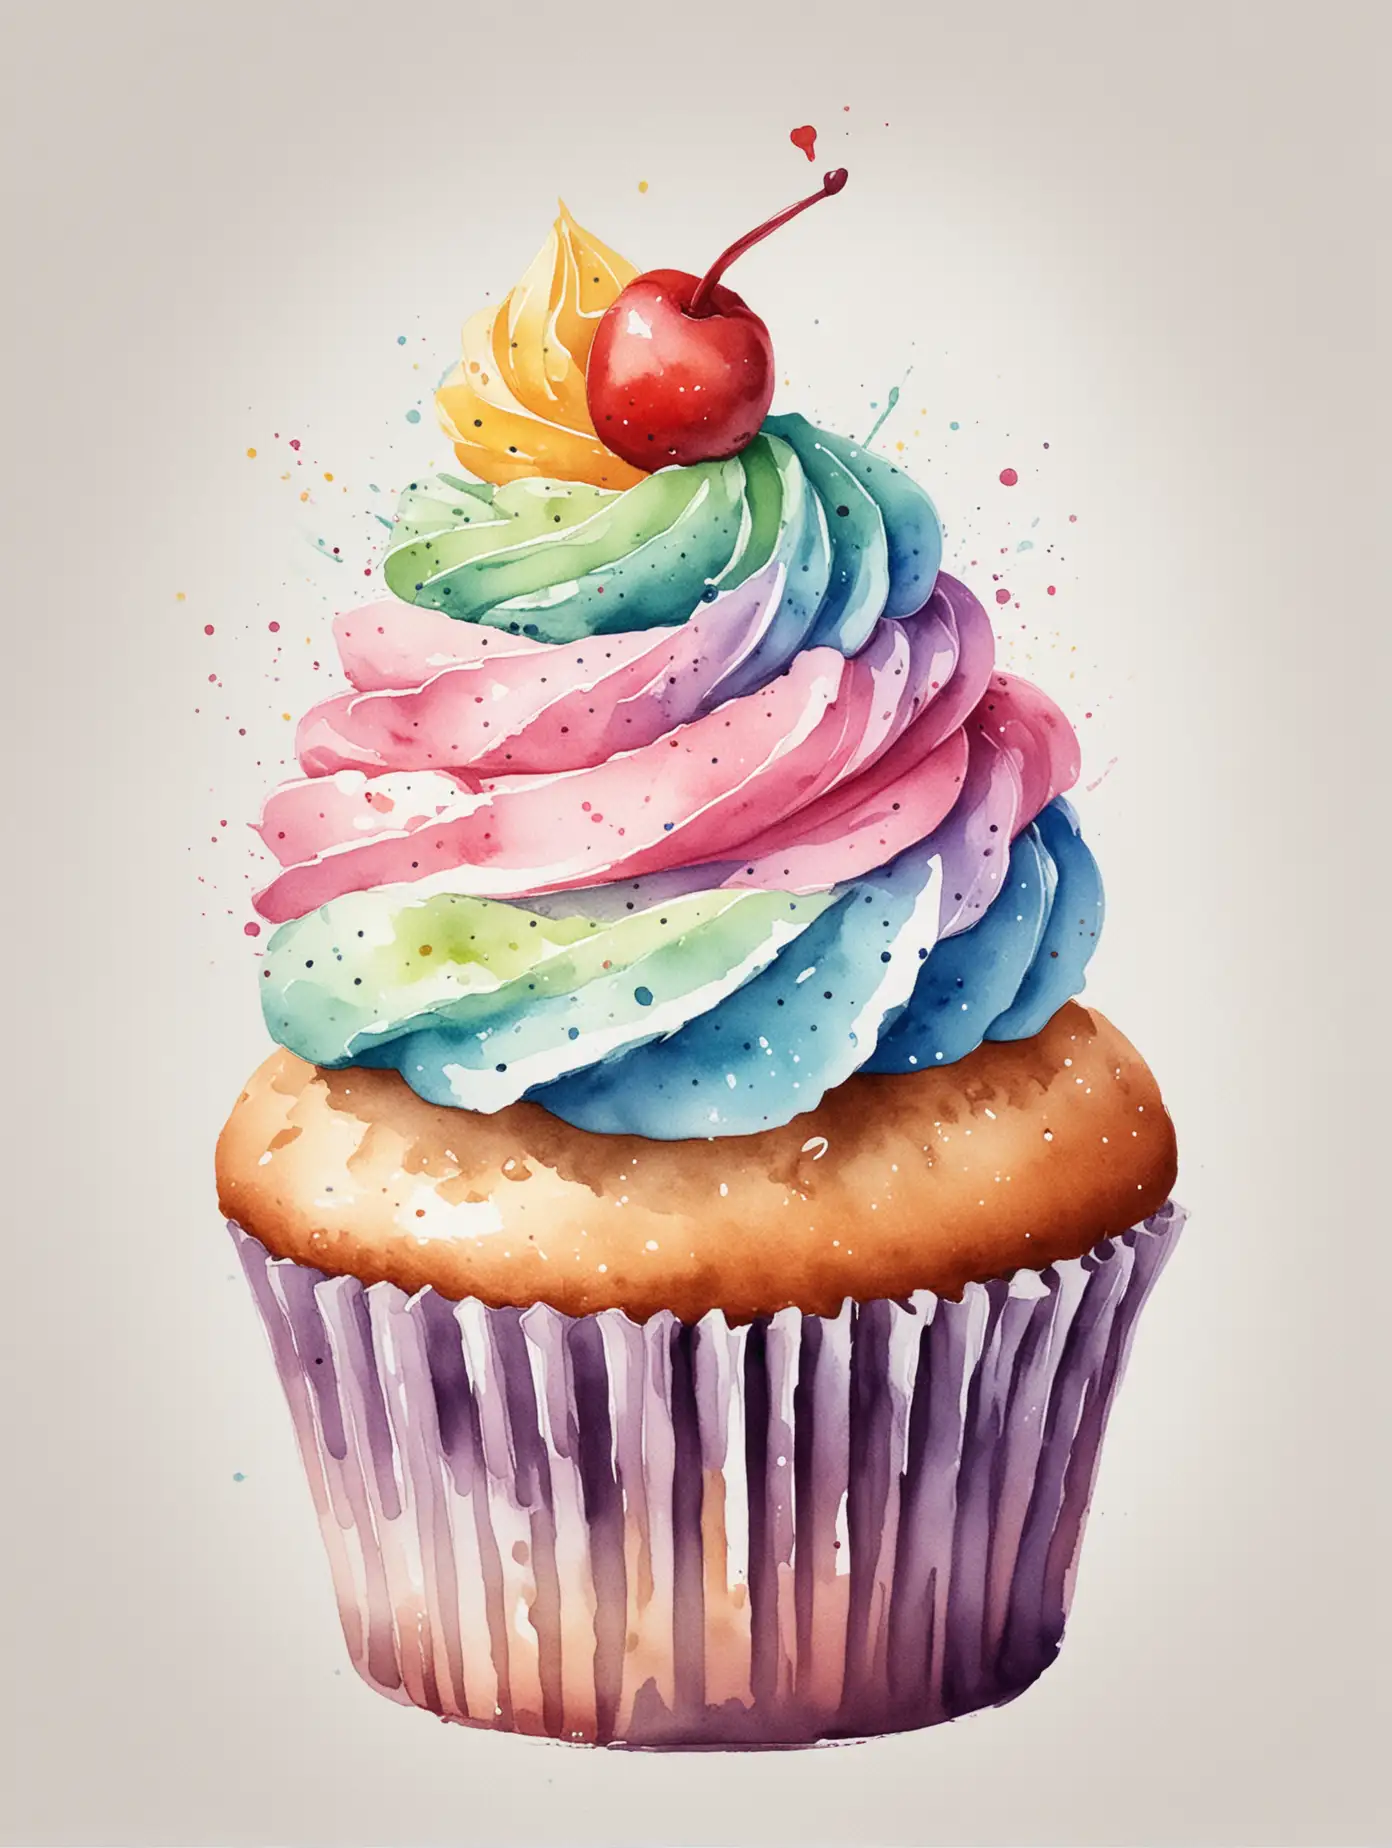 A single cupcake, colourful, watercolour style, no background